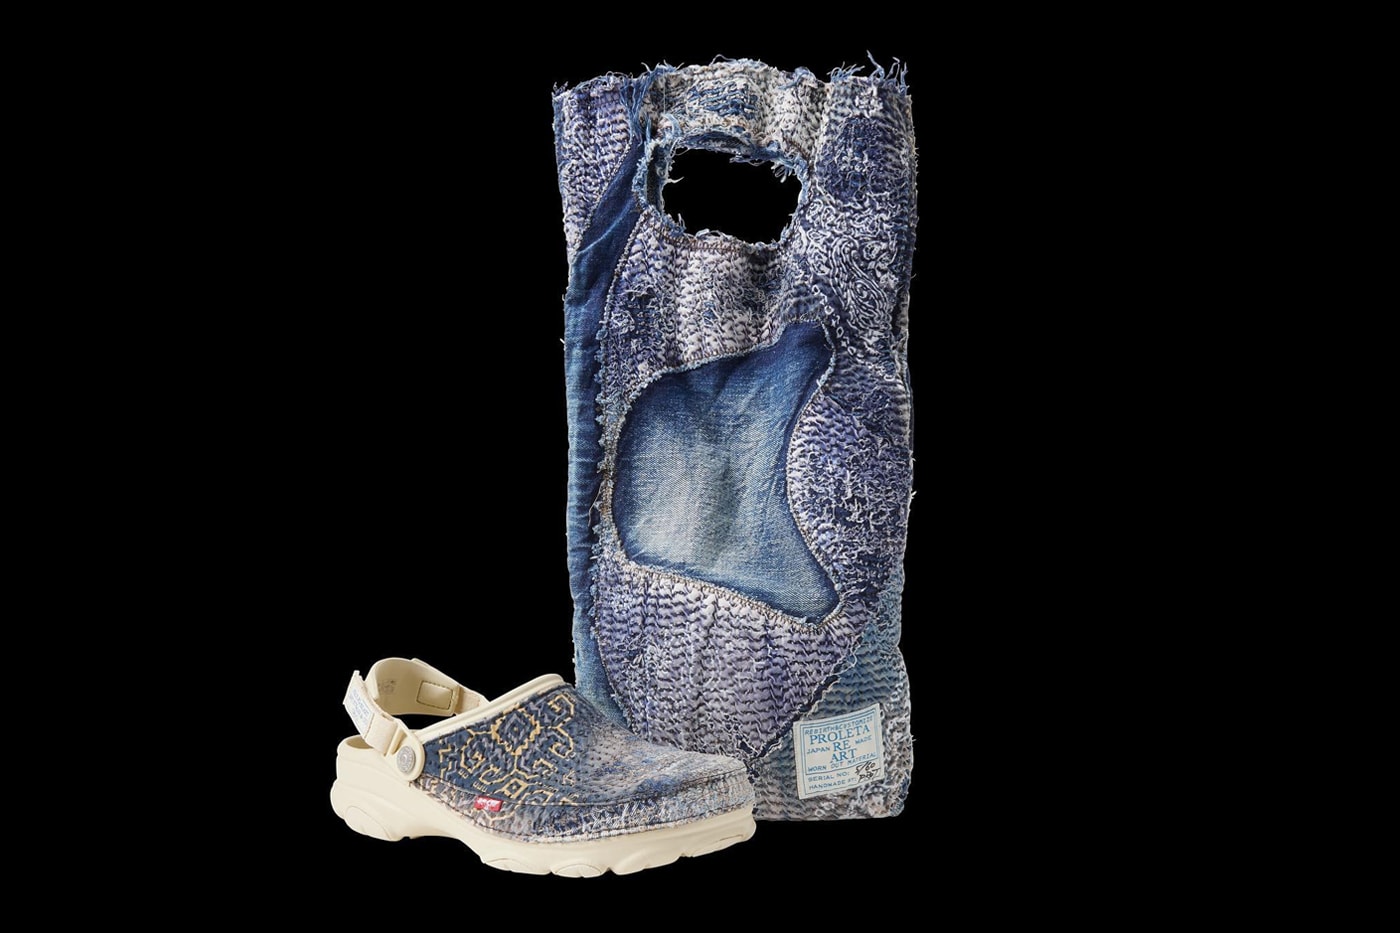 PROLETA RE ART Collaborates With Levis and Crocs for Special Shoe and Bag Combo Using Dead Stock Denim sustainability 